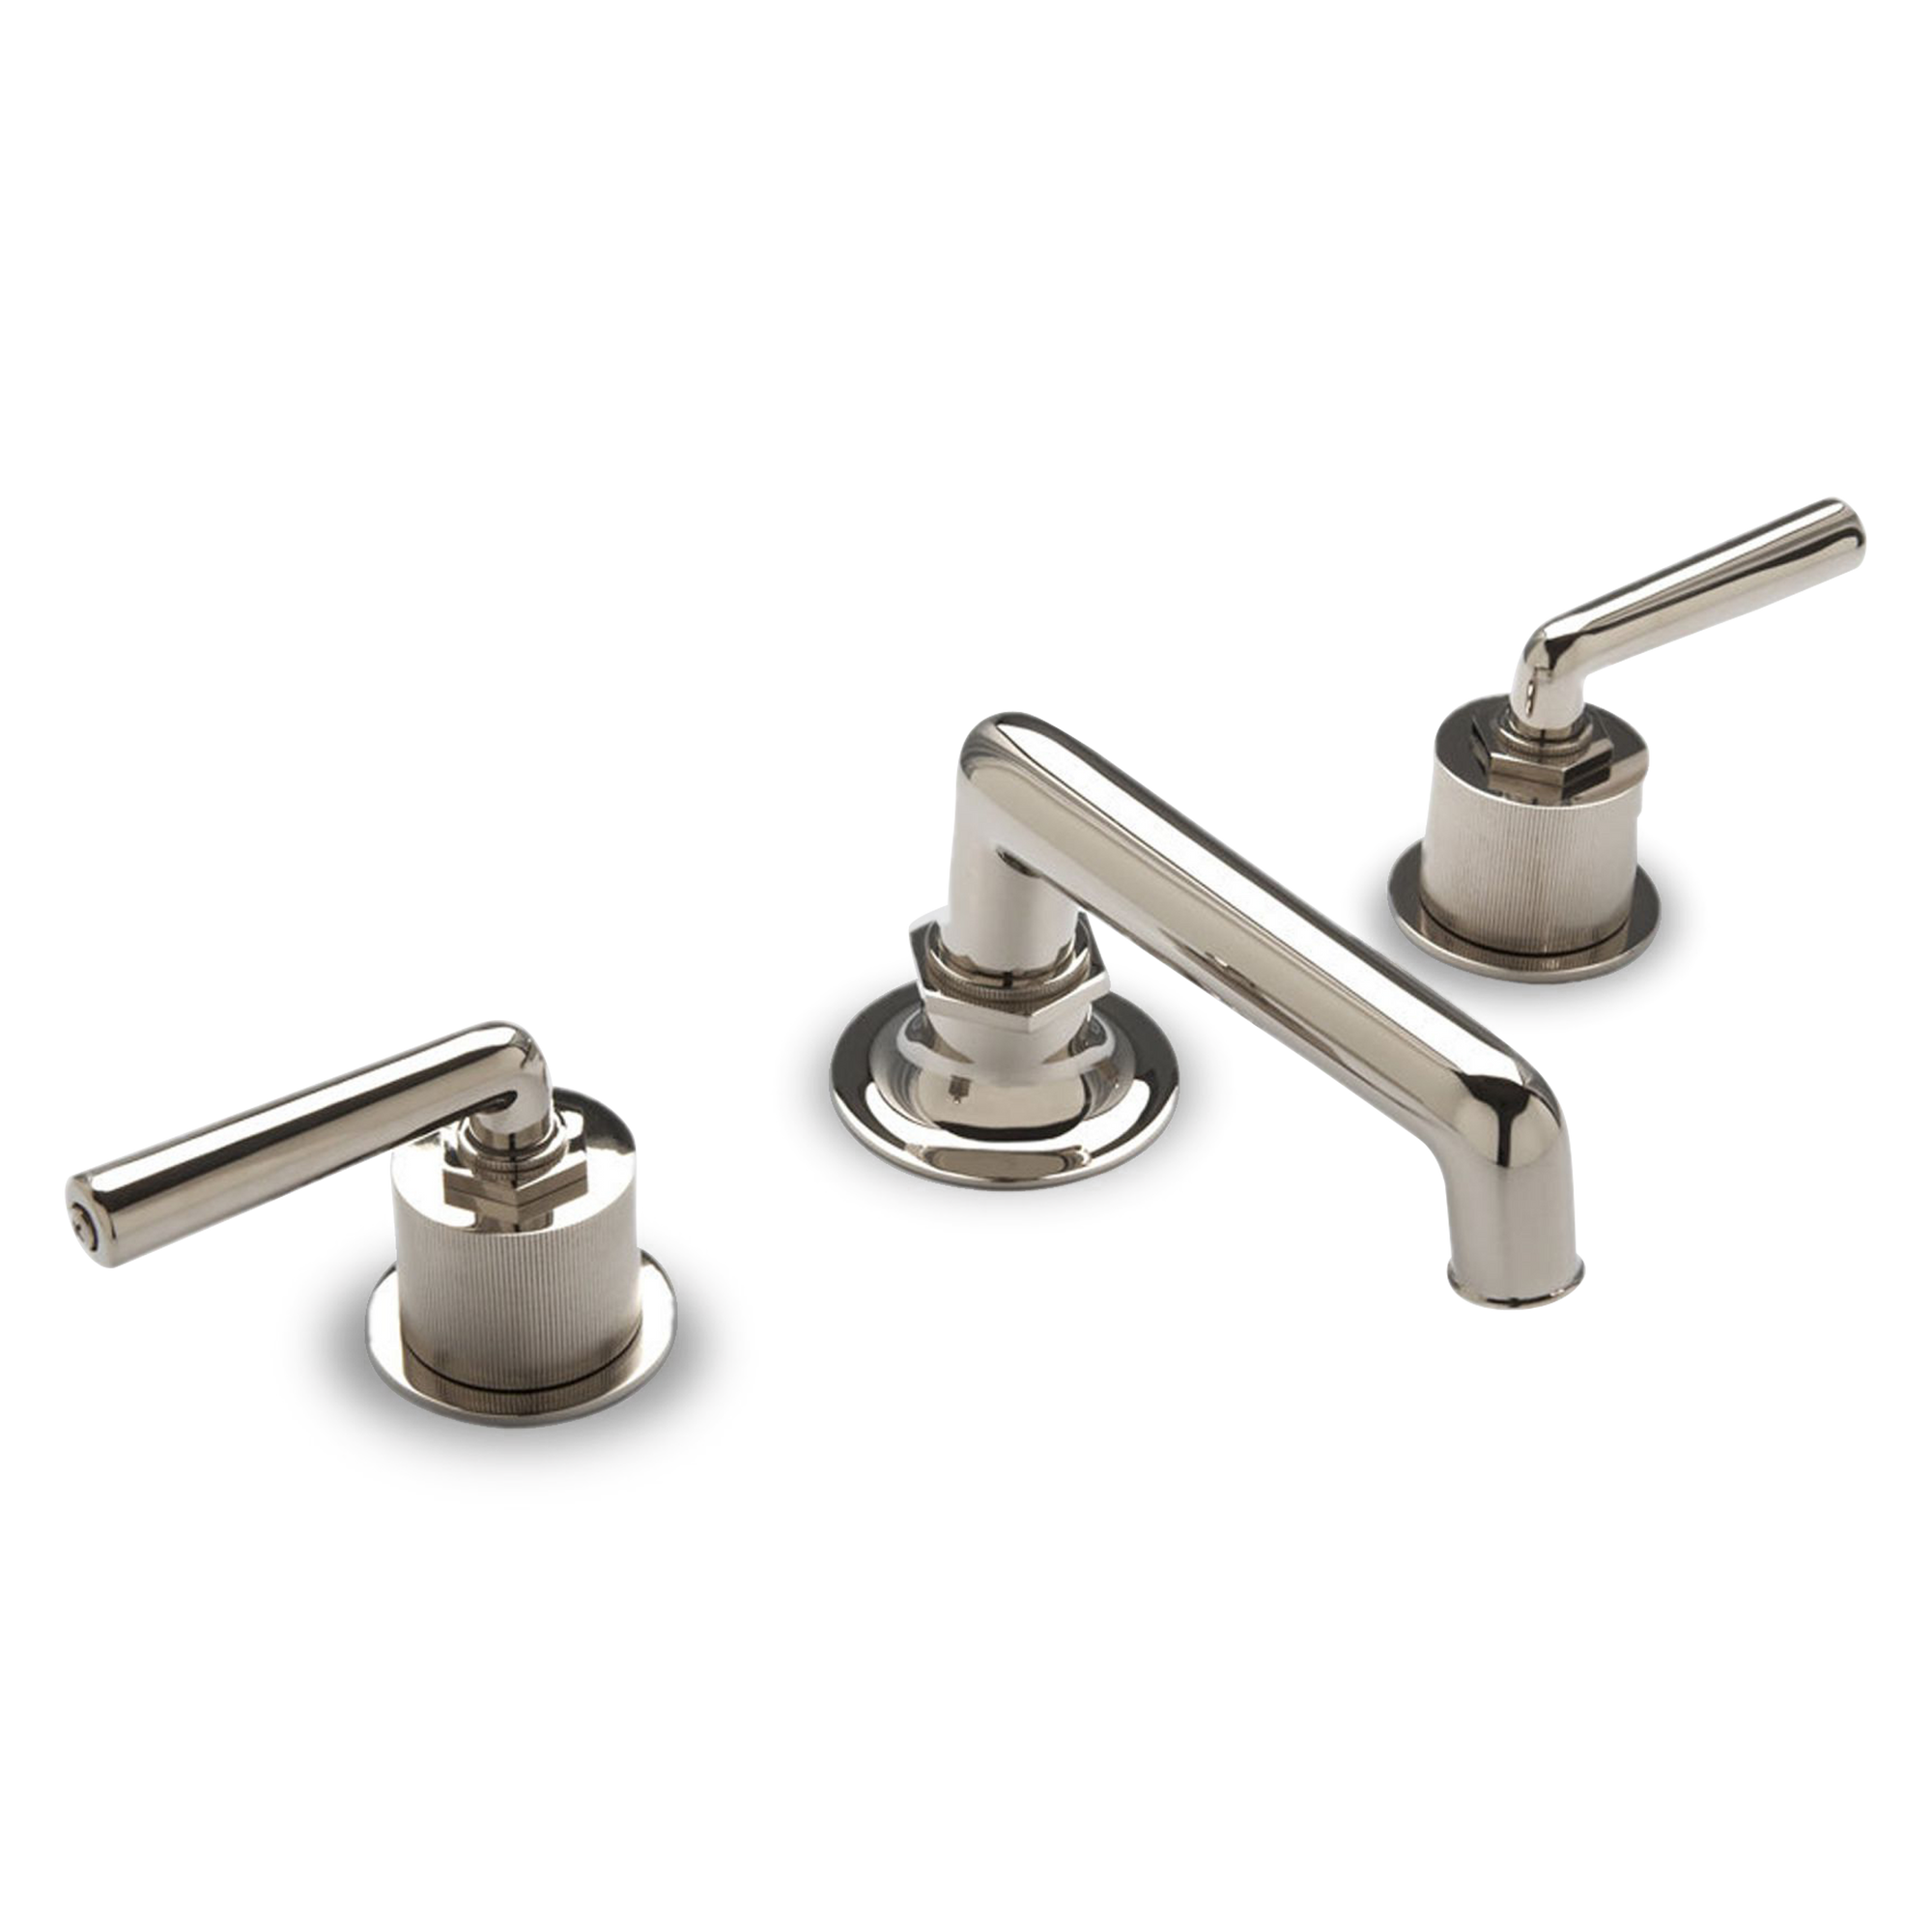 A transitional faucet with lever handles and coin edge detailing on the cylinders.